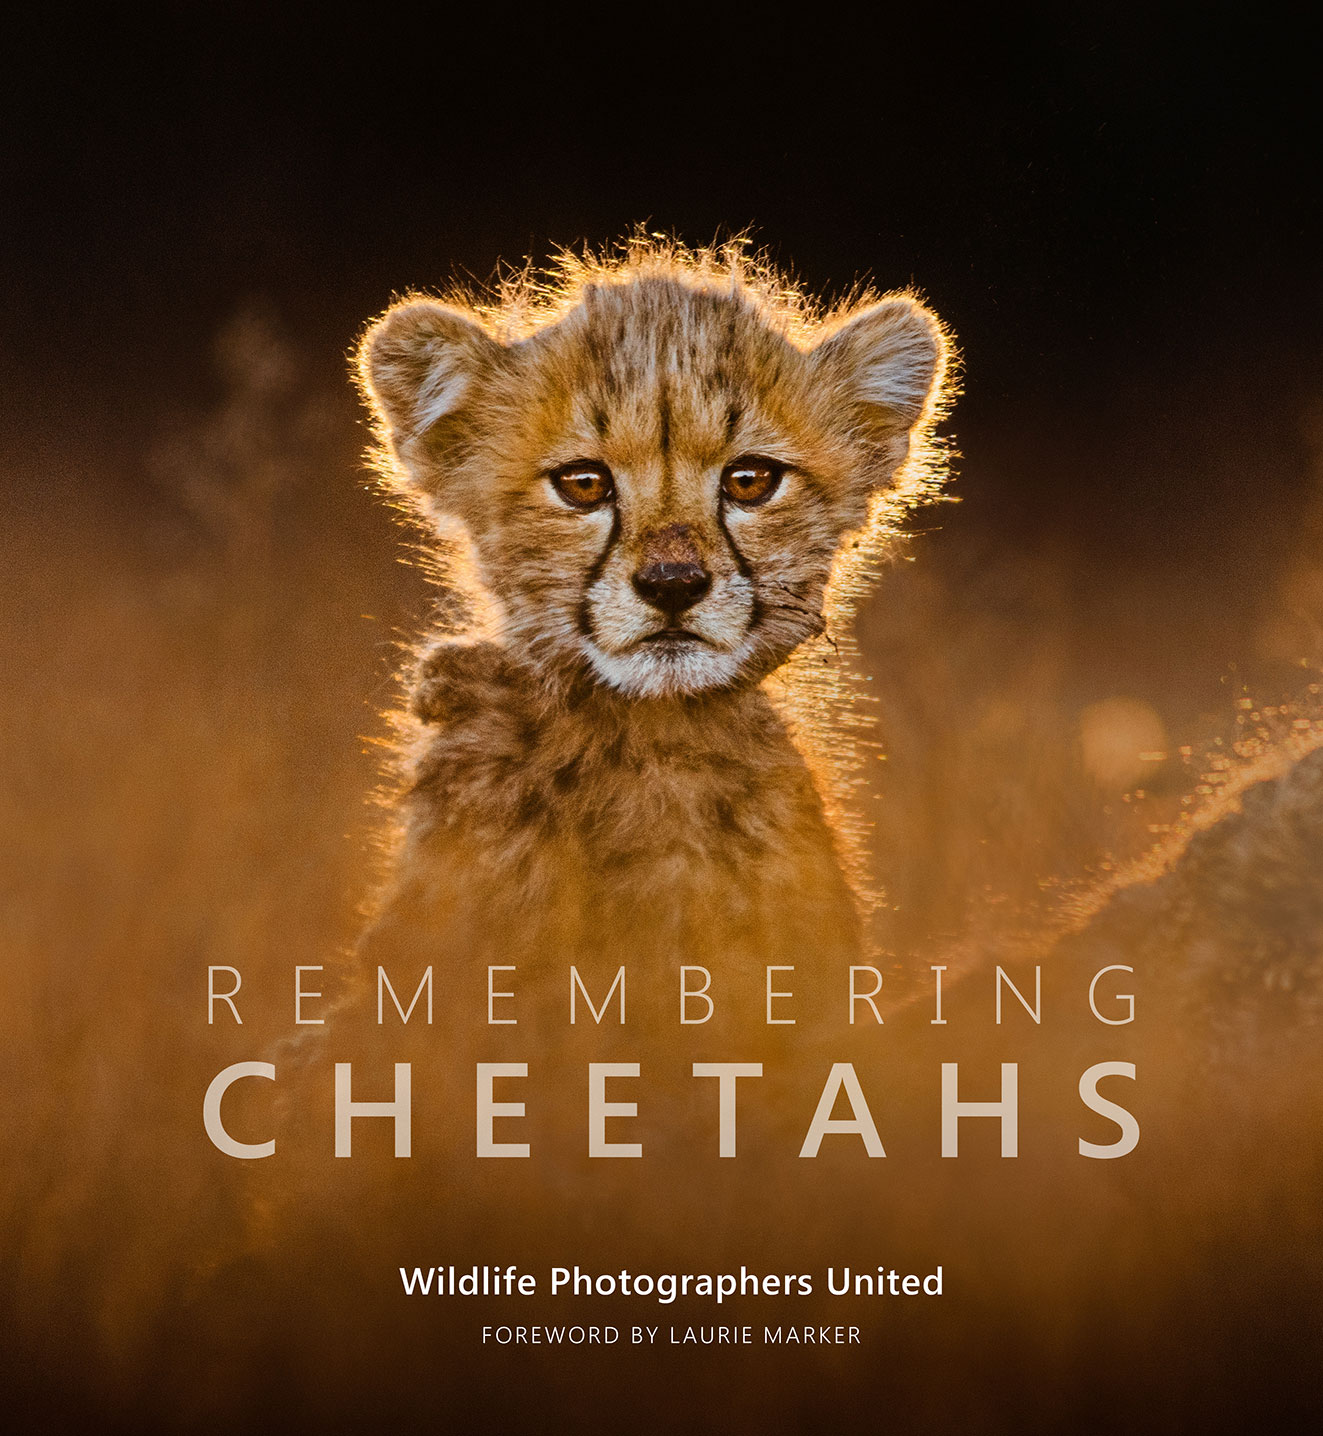 It’s time to remember wild cheetahs